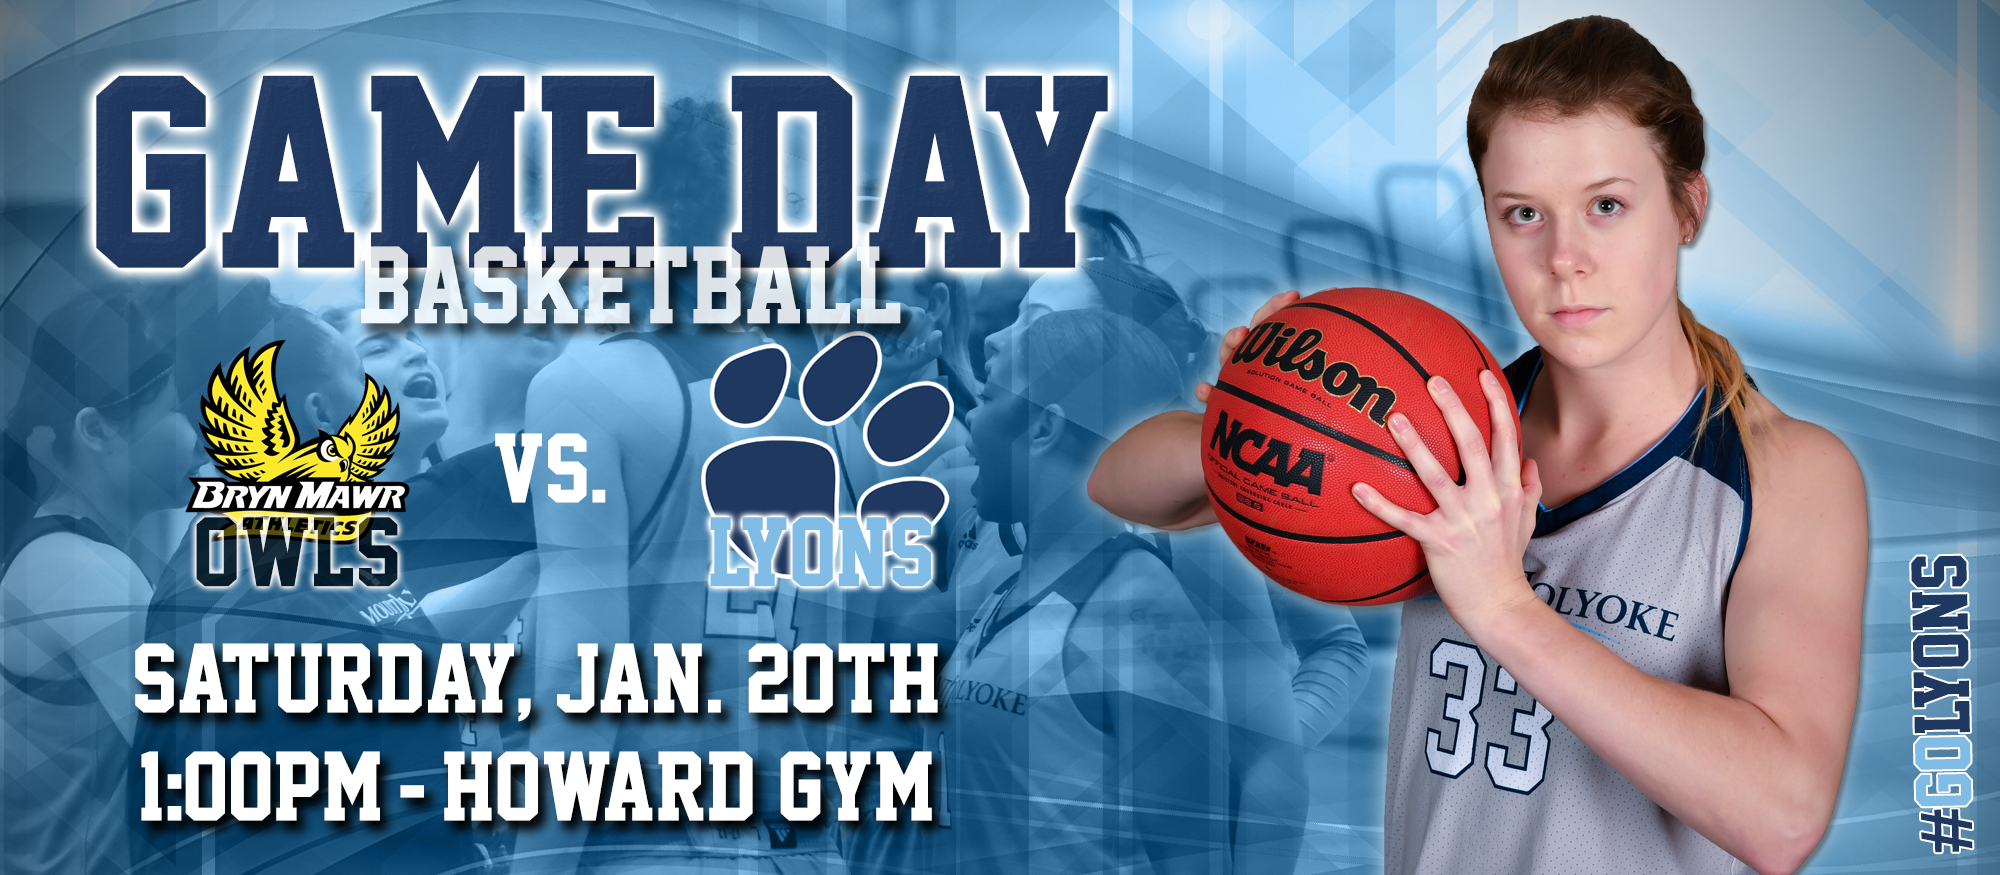 Gameday graphic promoting the Saturday, January 20th basketball game between Bryn Mawr and Mount Holyoke at 1pm at the Mildred S. Howard Gym.